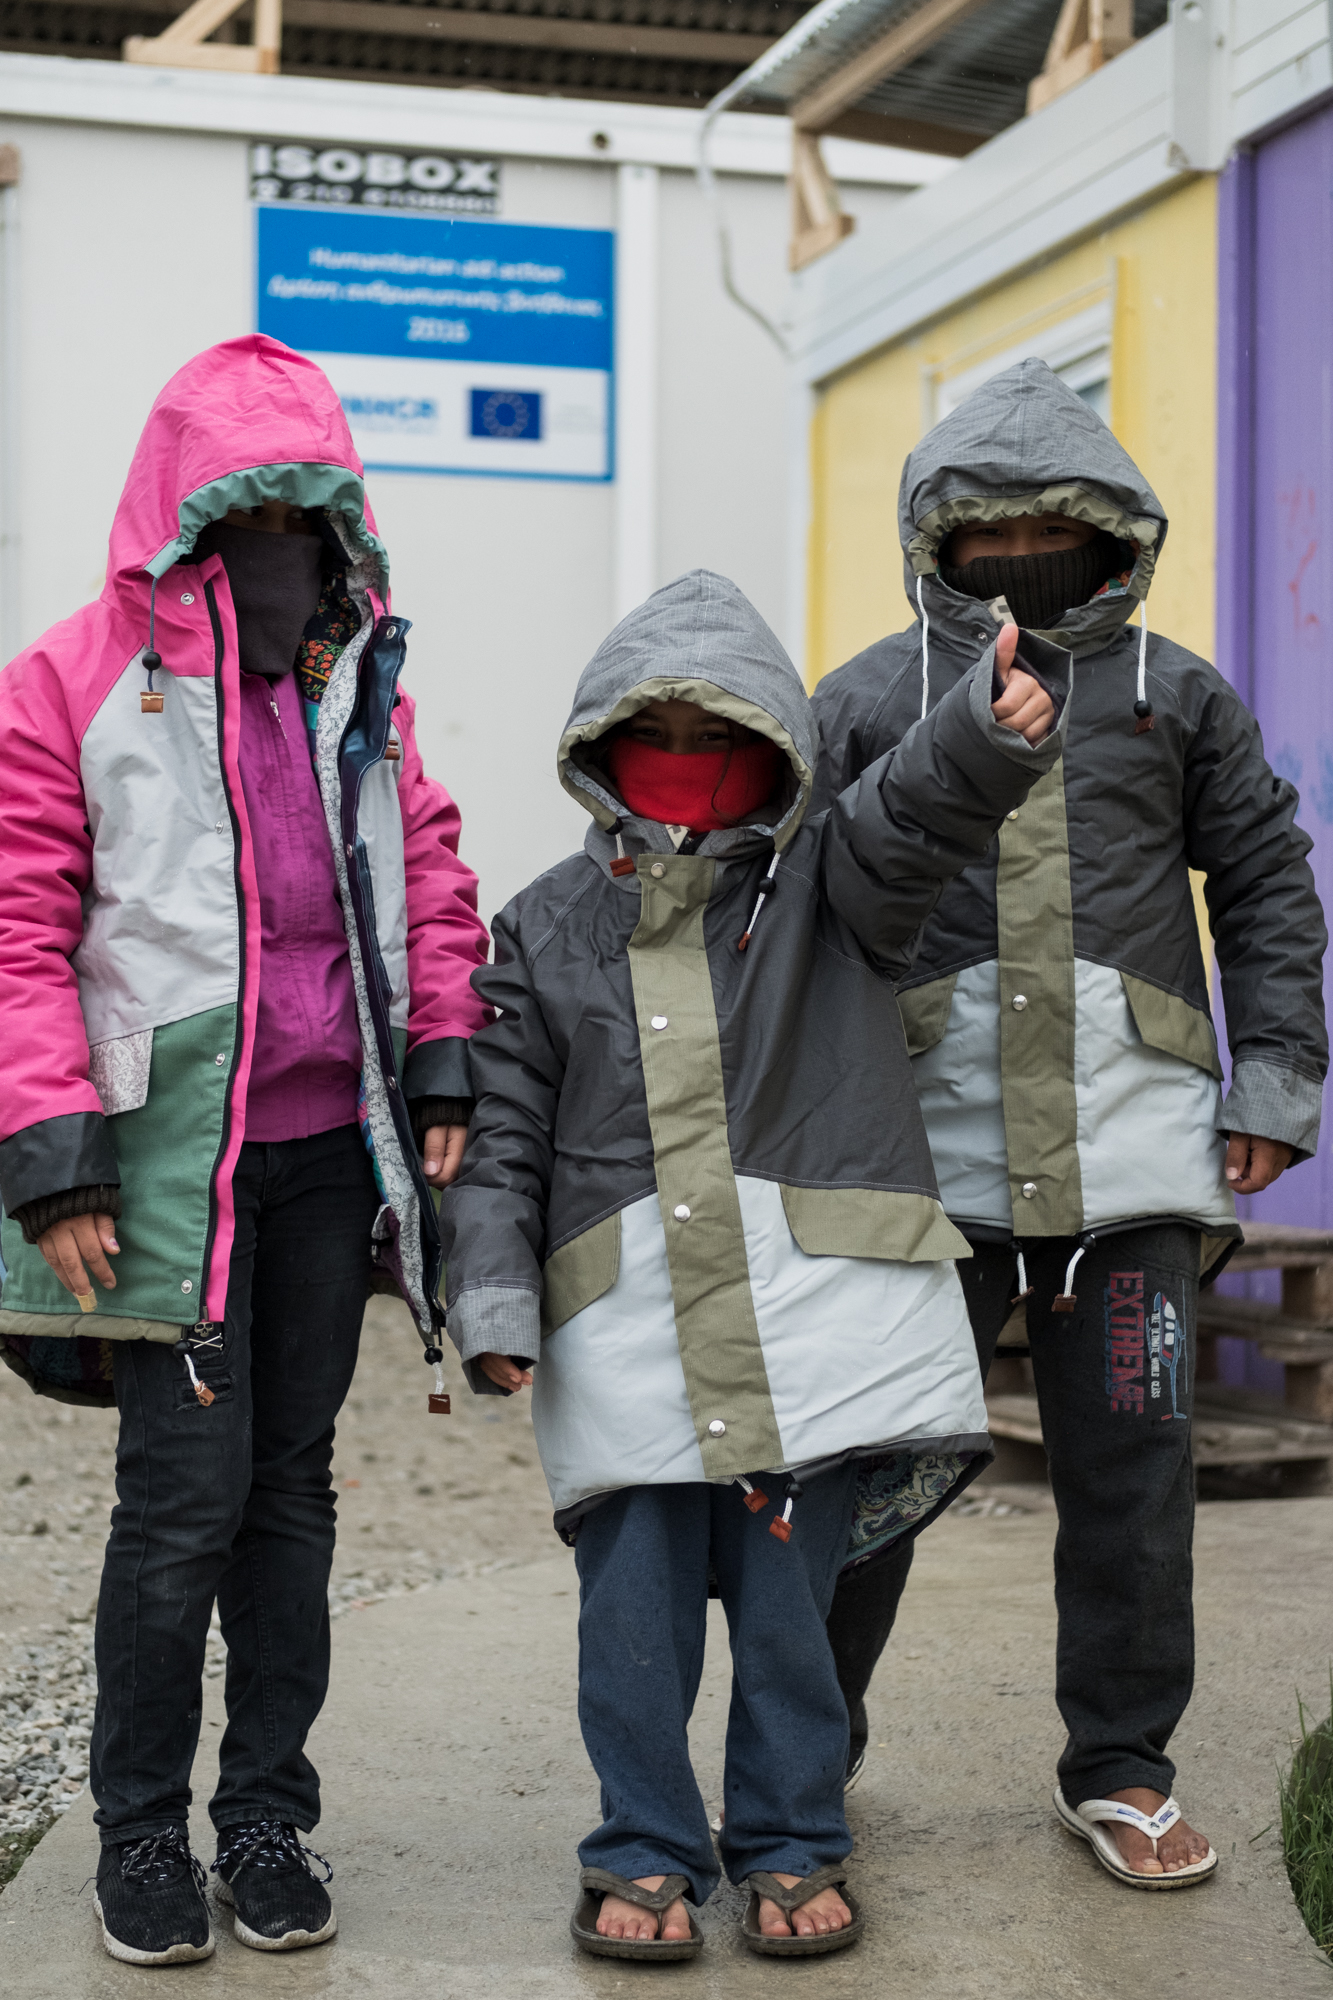 There are different variants such as sleeping bags, walking suits similar to children's ski suits and a children's edition of the Sheltersuit has been made. This is a zip-off jacket with sleeping bag that can also be used by older children.